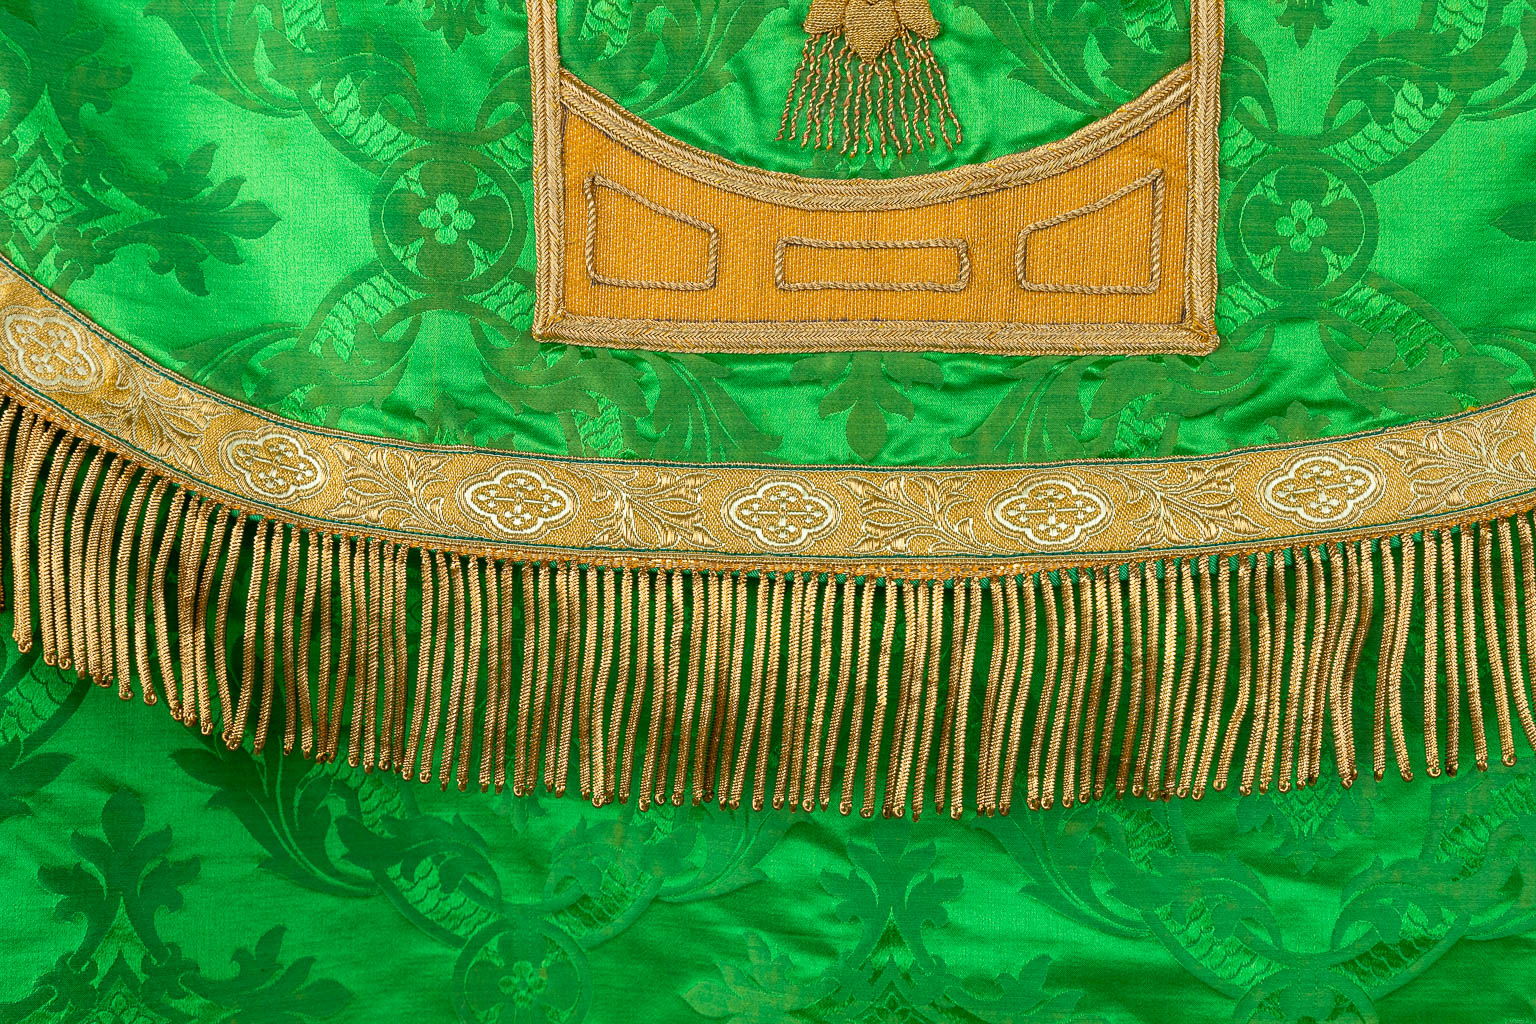 A Cope and Humeral Veil, finished with thick gold thread and green fabric and the IHS logo.